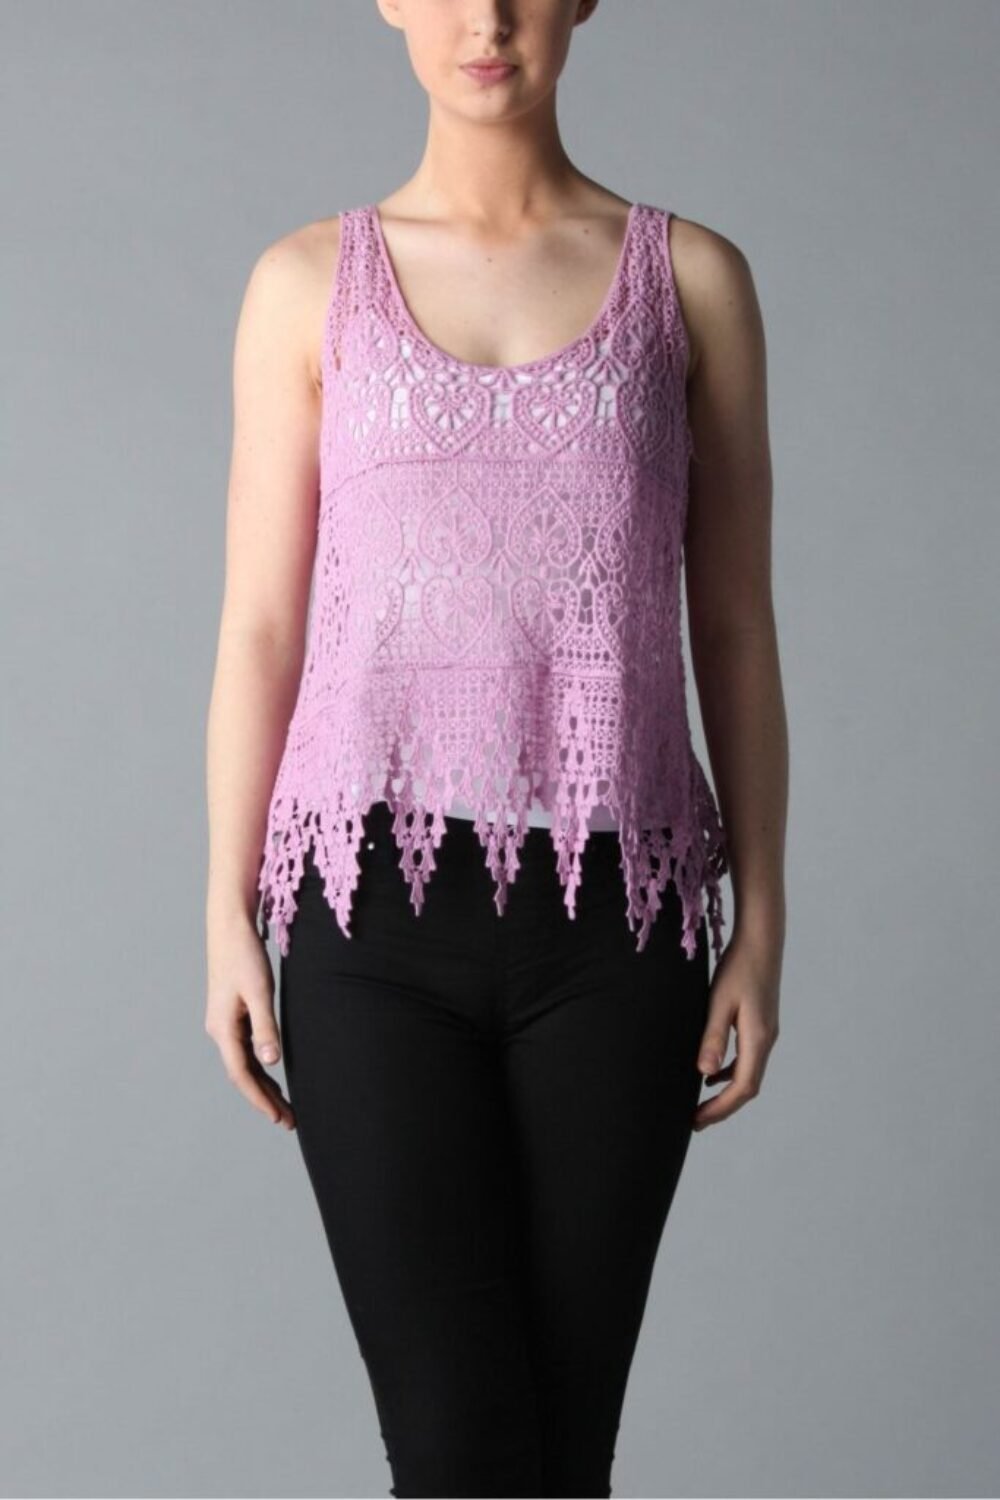 Shop Lux Pink Crotchet Lace Top and women's luxury and designer clothes at www.lux-apparel.co.uk